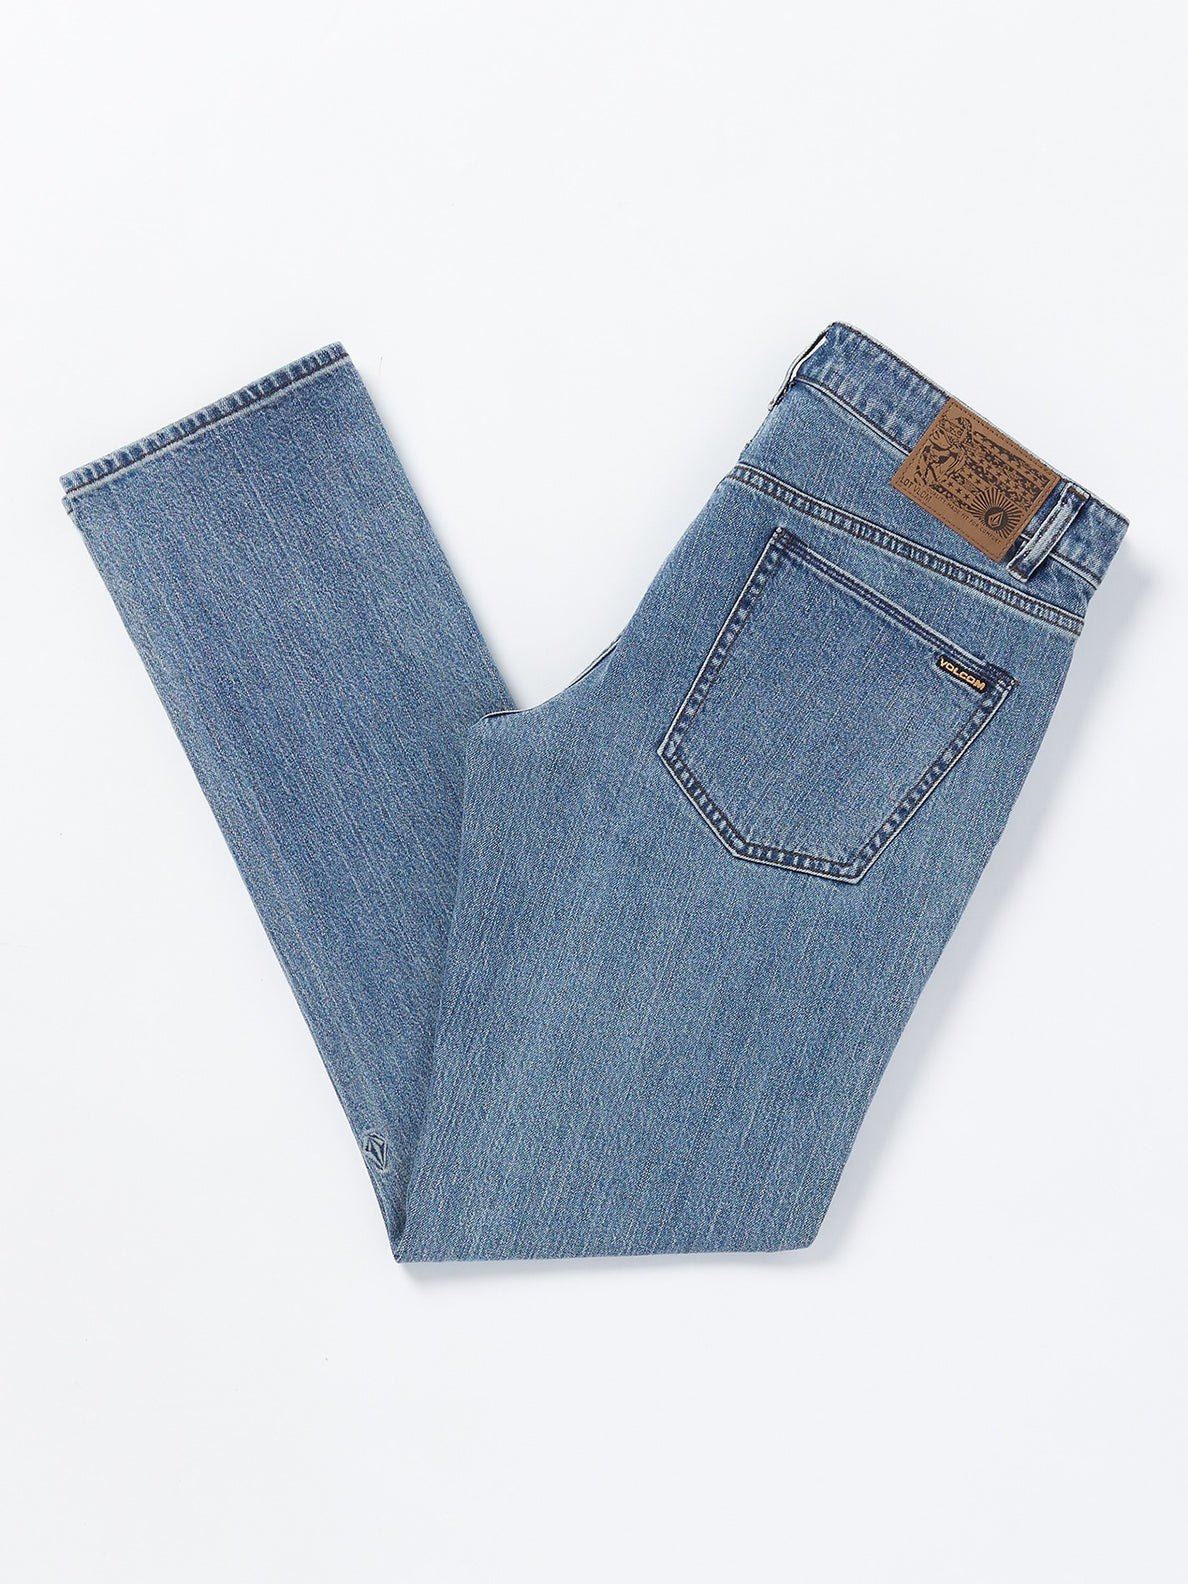 Dylan Slim Fit Fleeced Jeans for Tall Men | American Tall